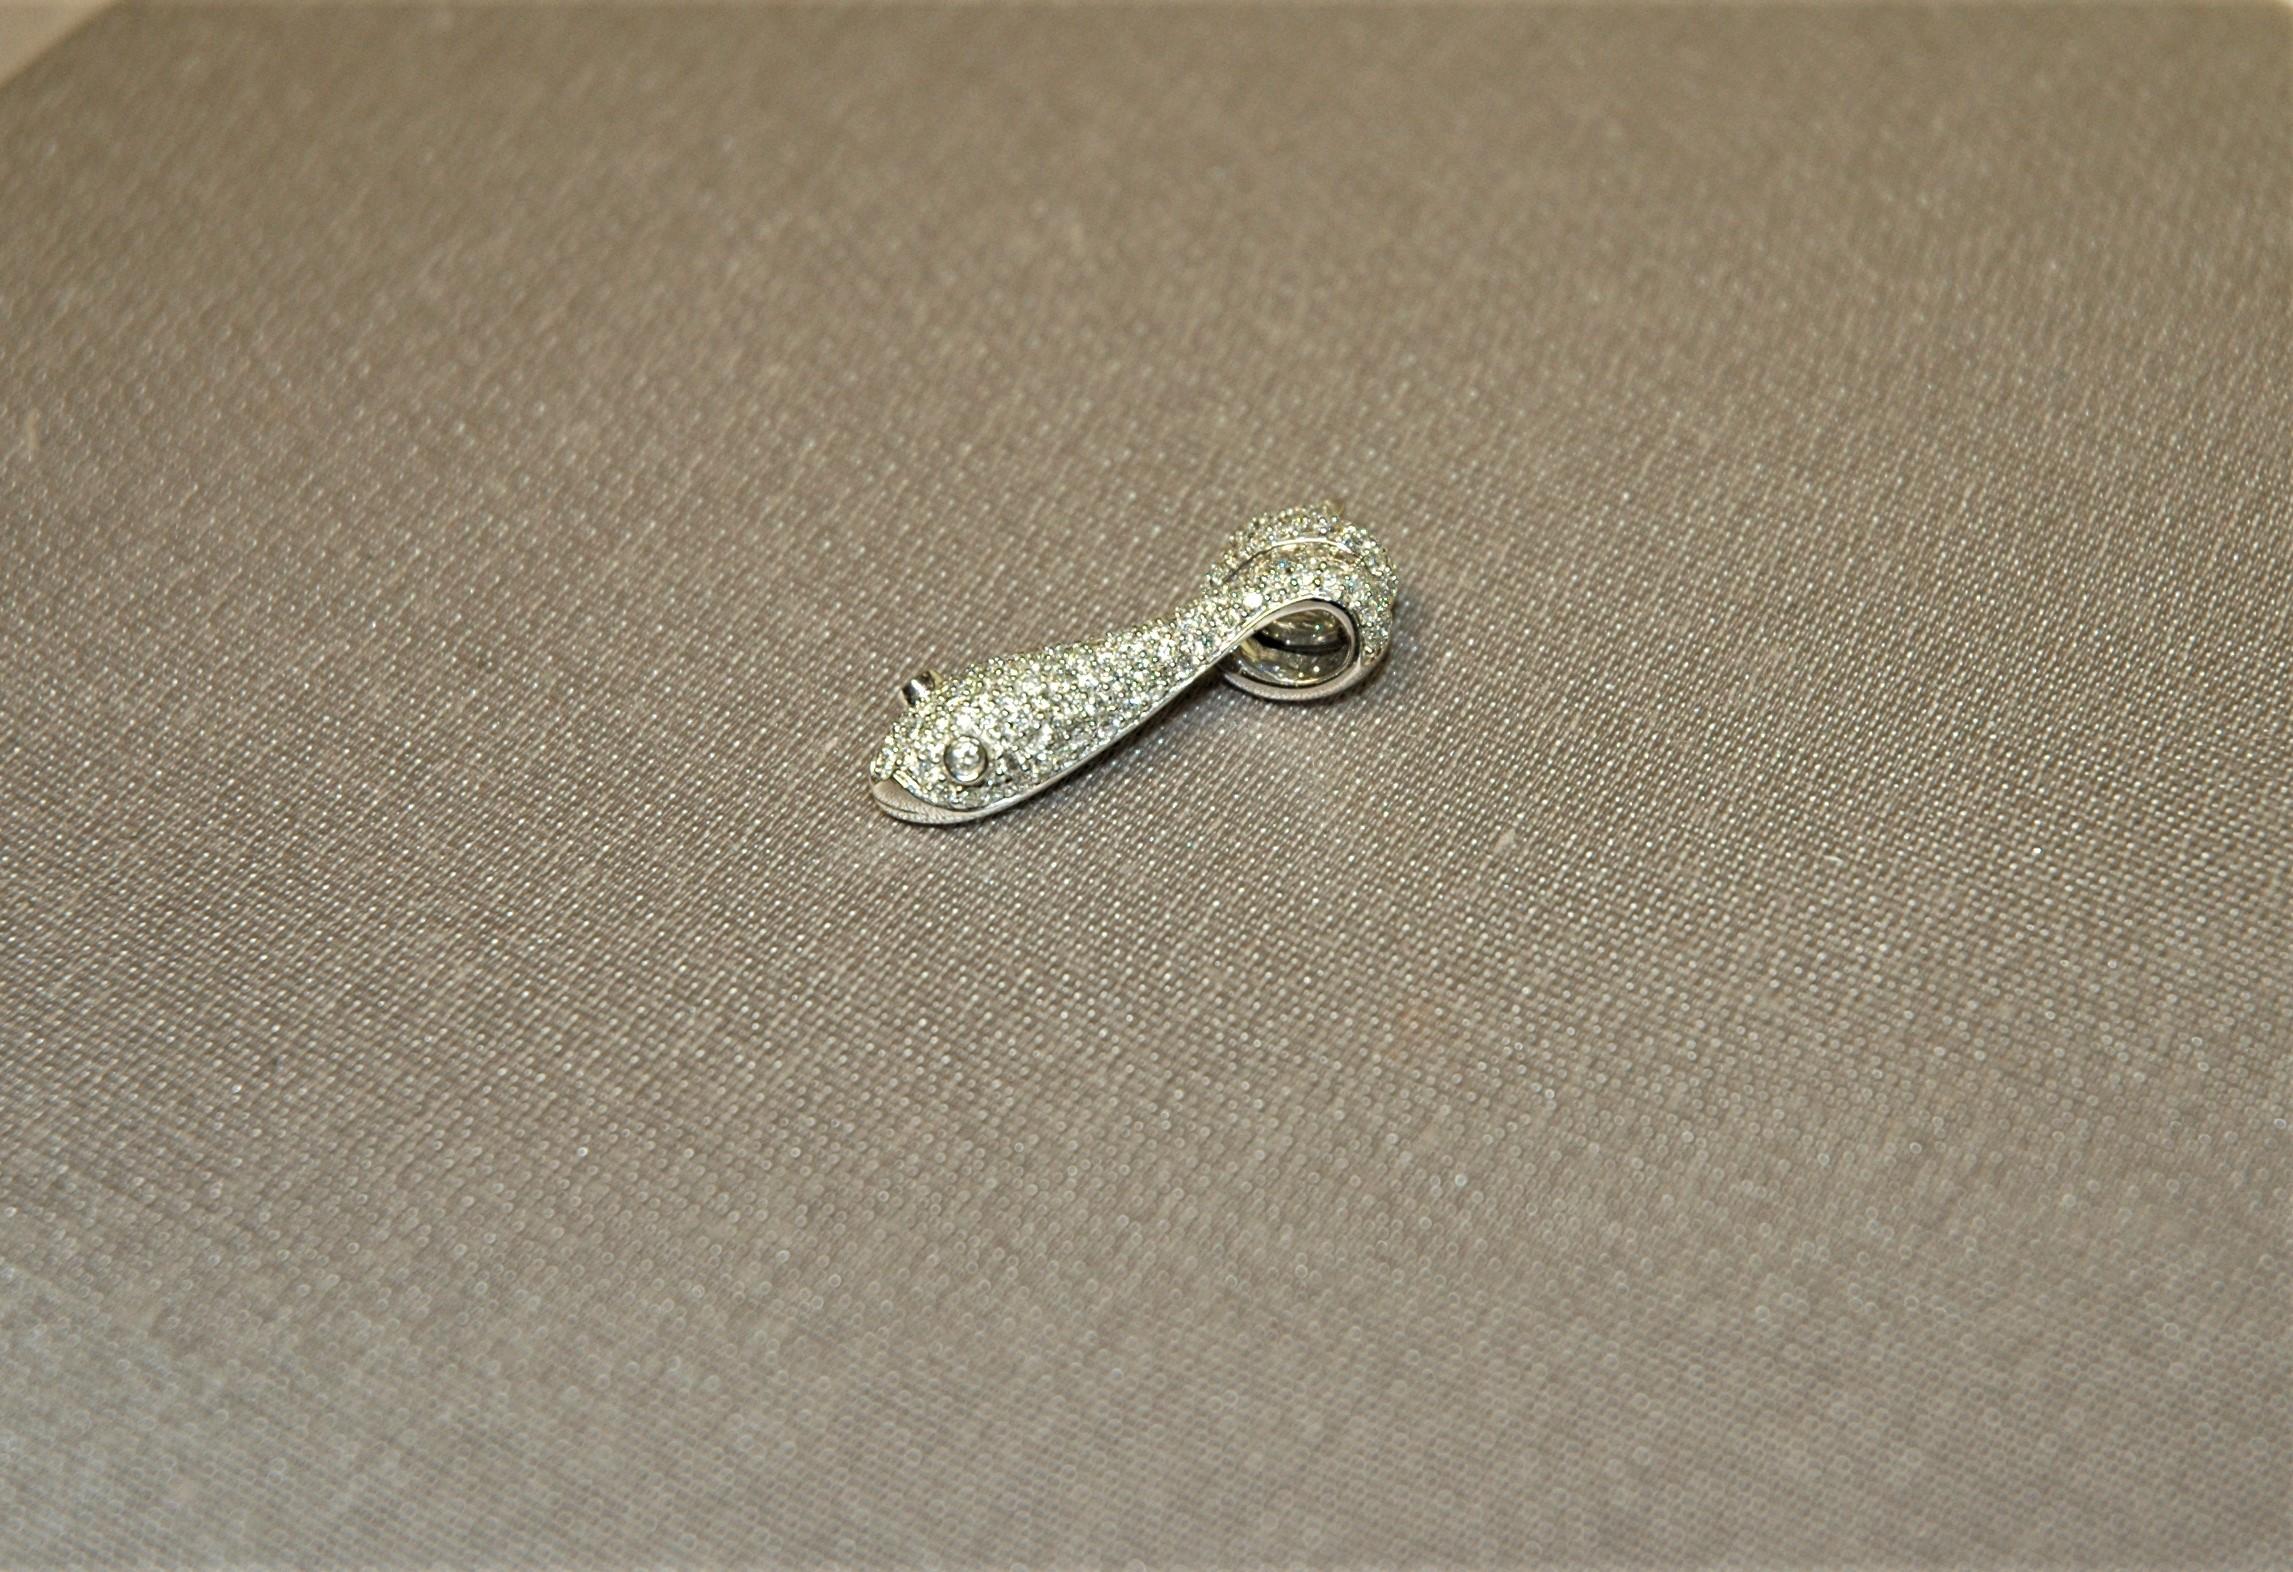 Pendant in white gold and diamonds (0.82 carats) in the shape of a snake with coiled coils.